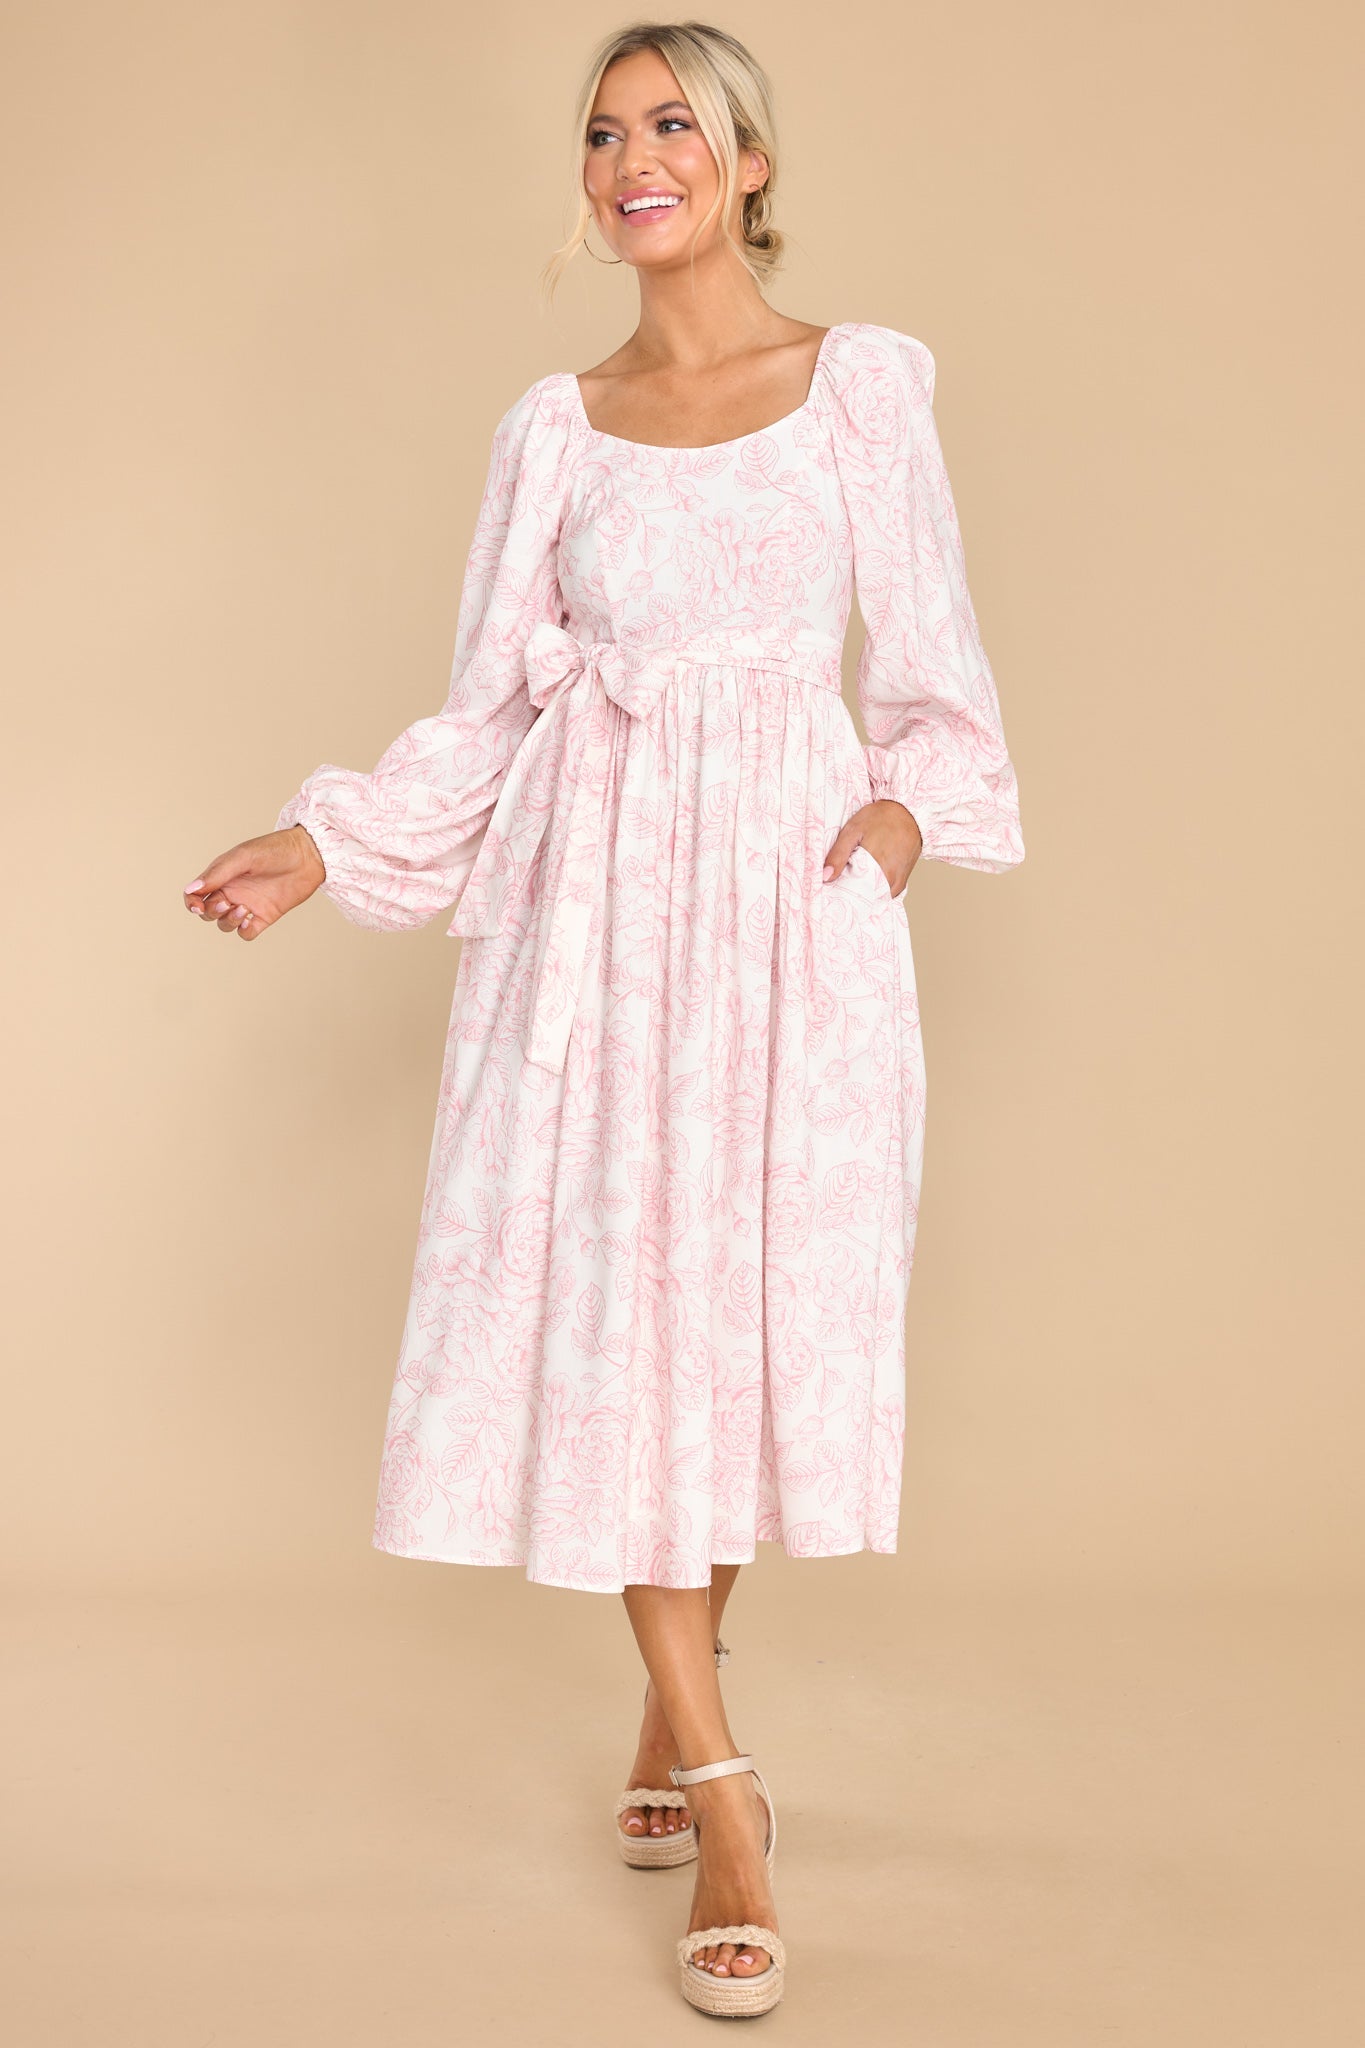 Feels Like Home Pink Floral Maxi Dress - Red Dress